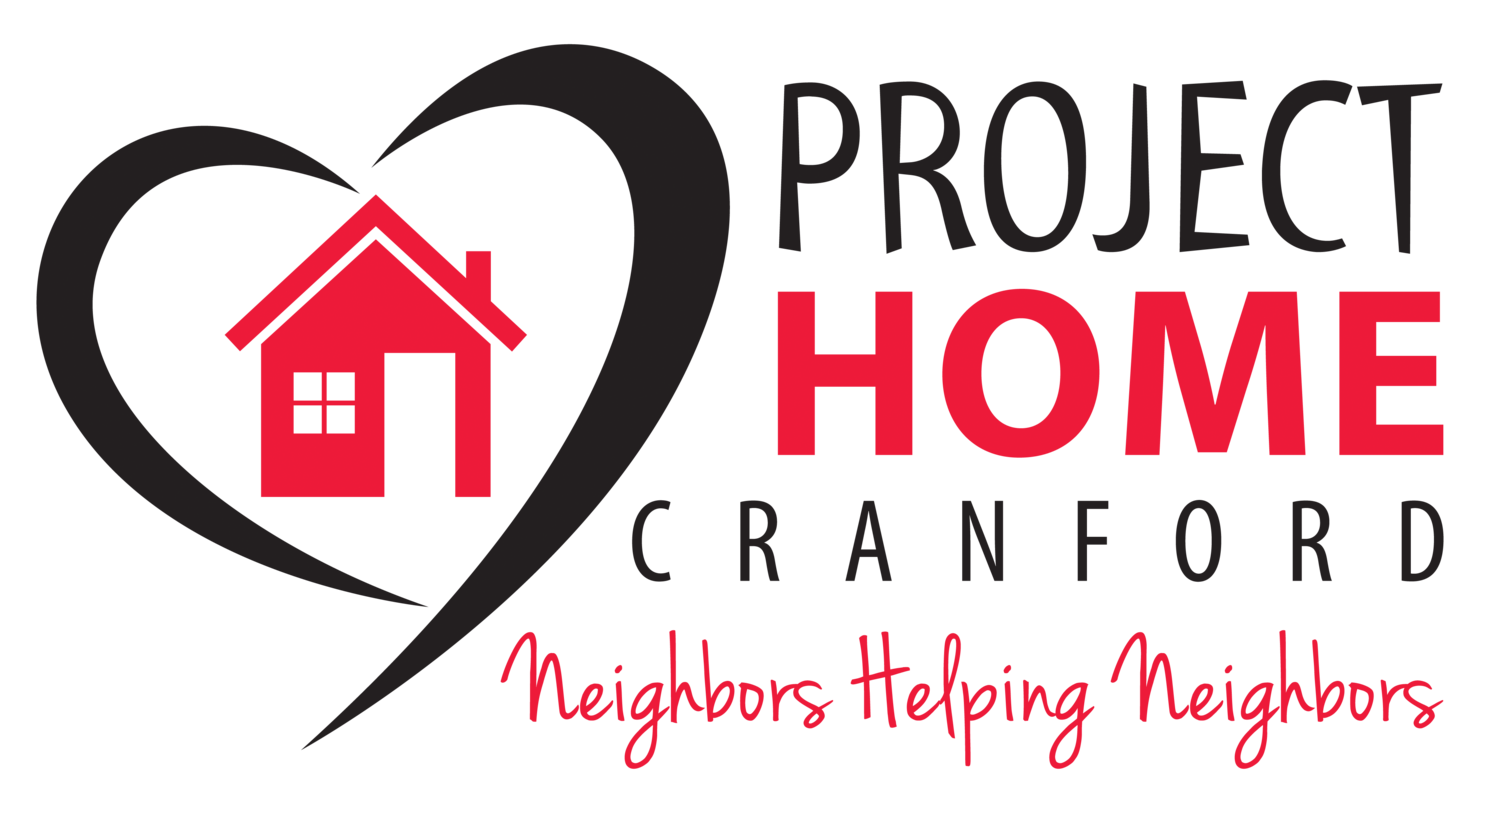 Project Home of Cranford